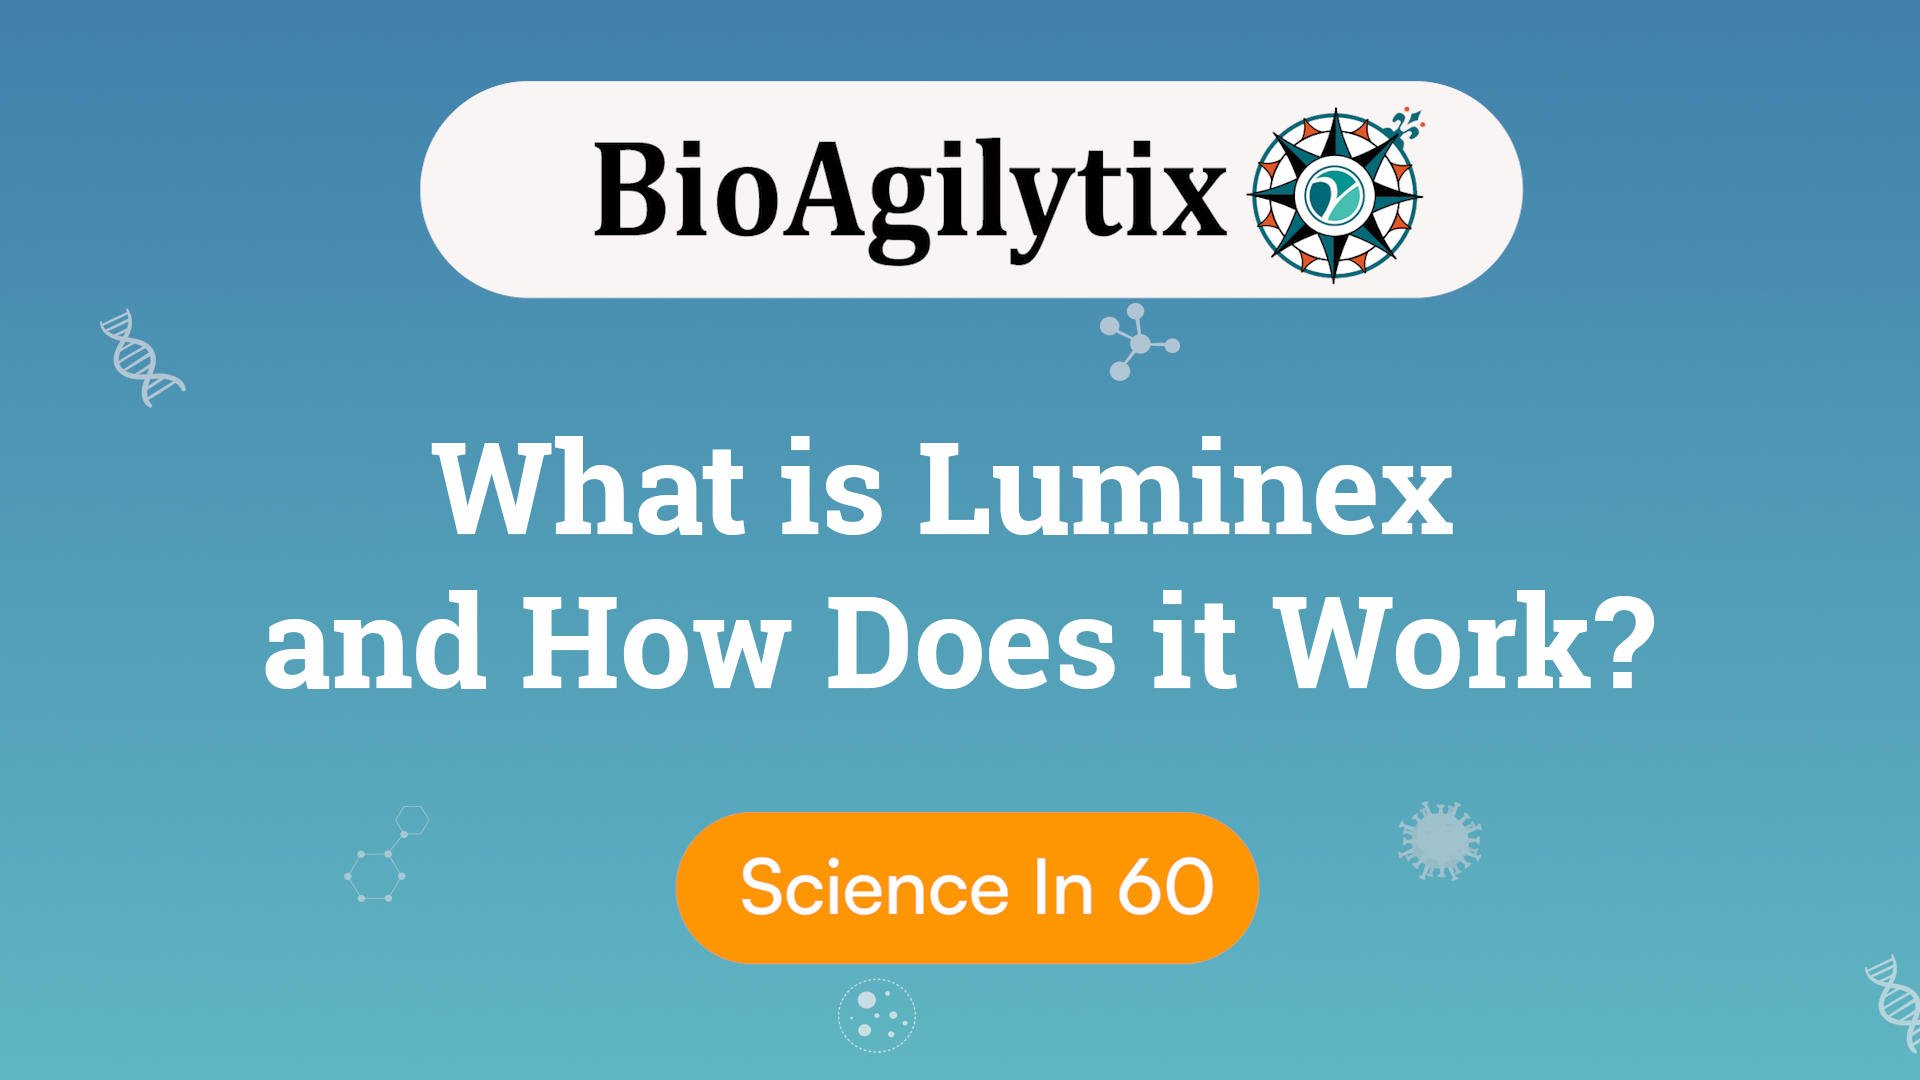 What is Luminex and How Does it Work?